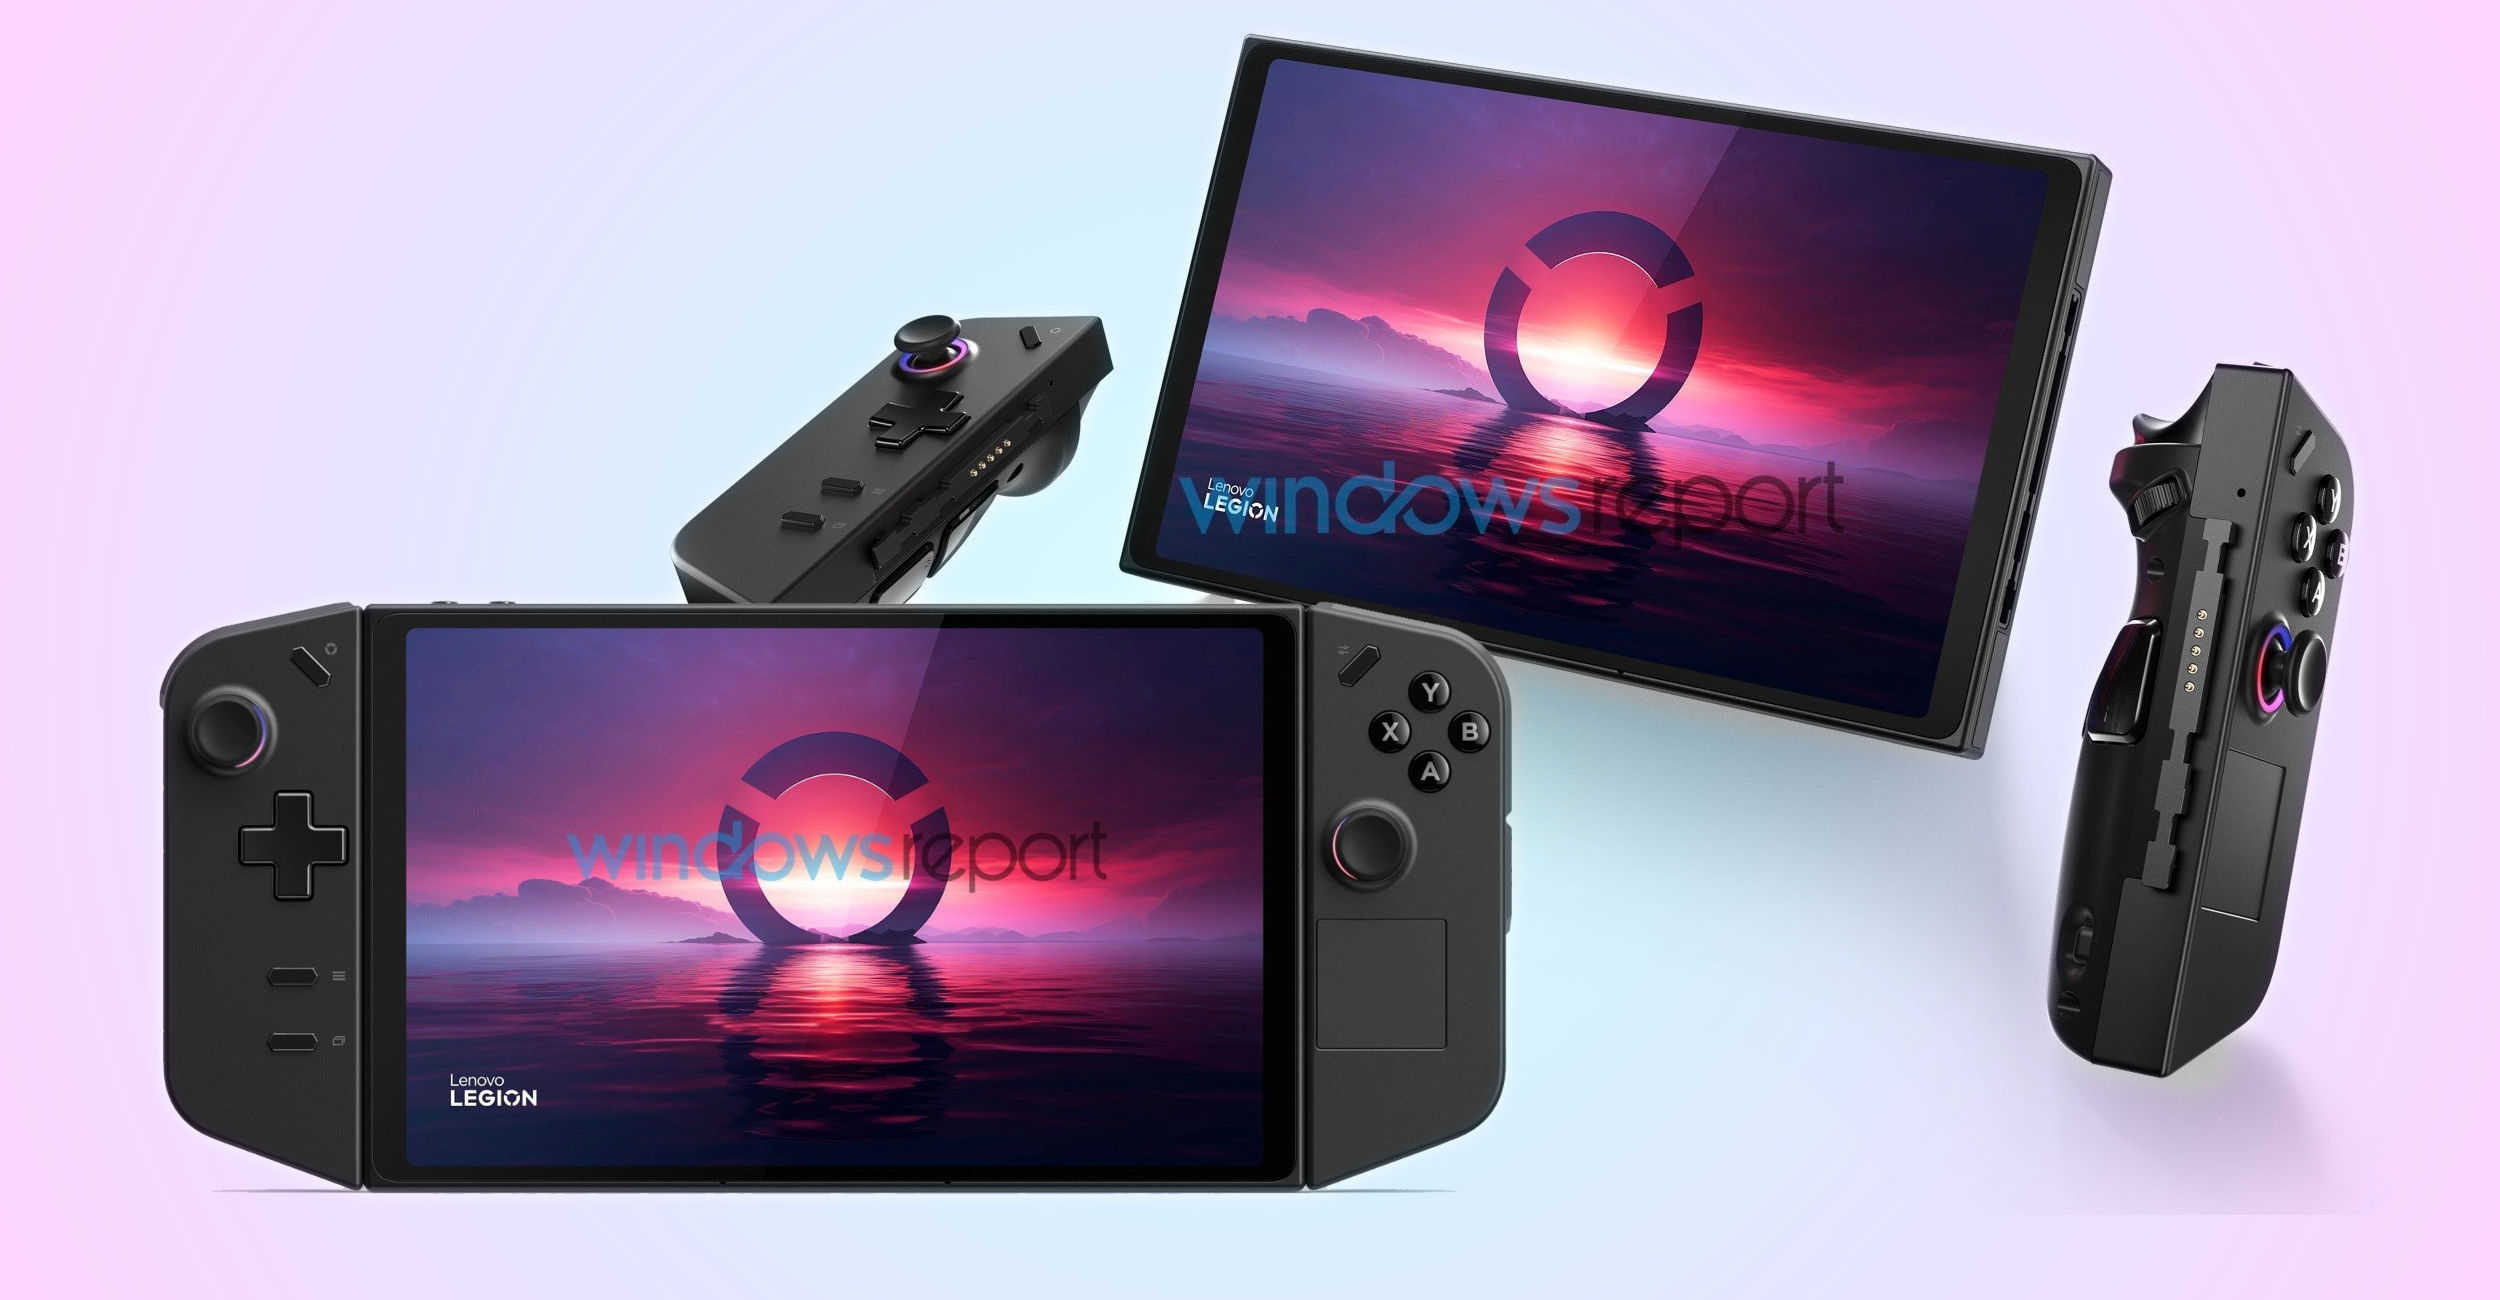 Nintendo Switch 2 Console Renders Hint At Smaller Bezels and